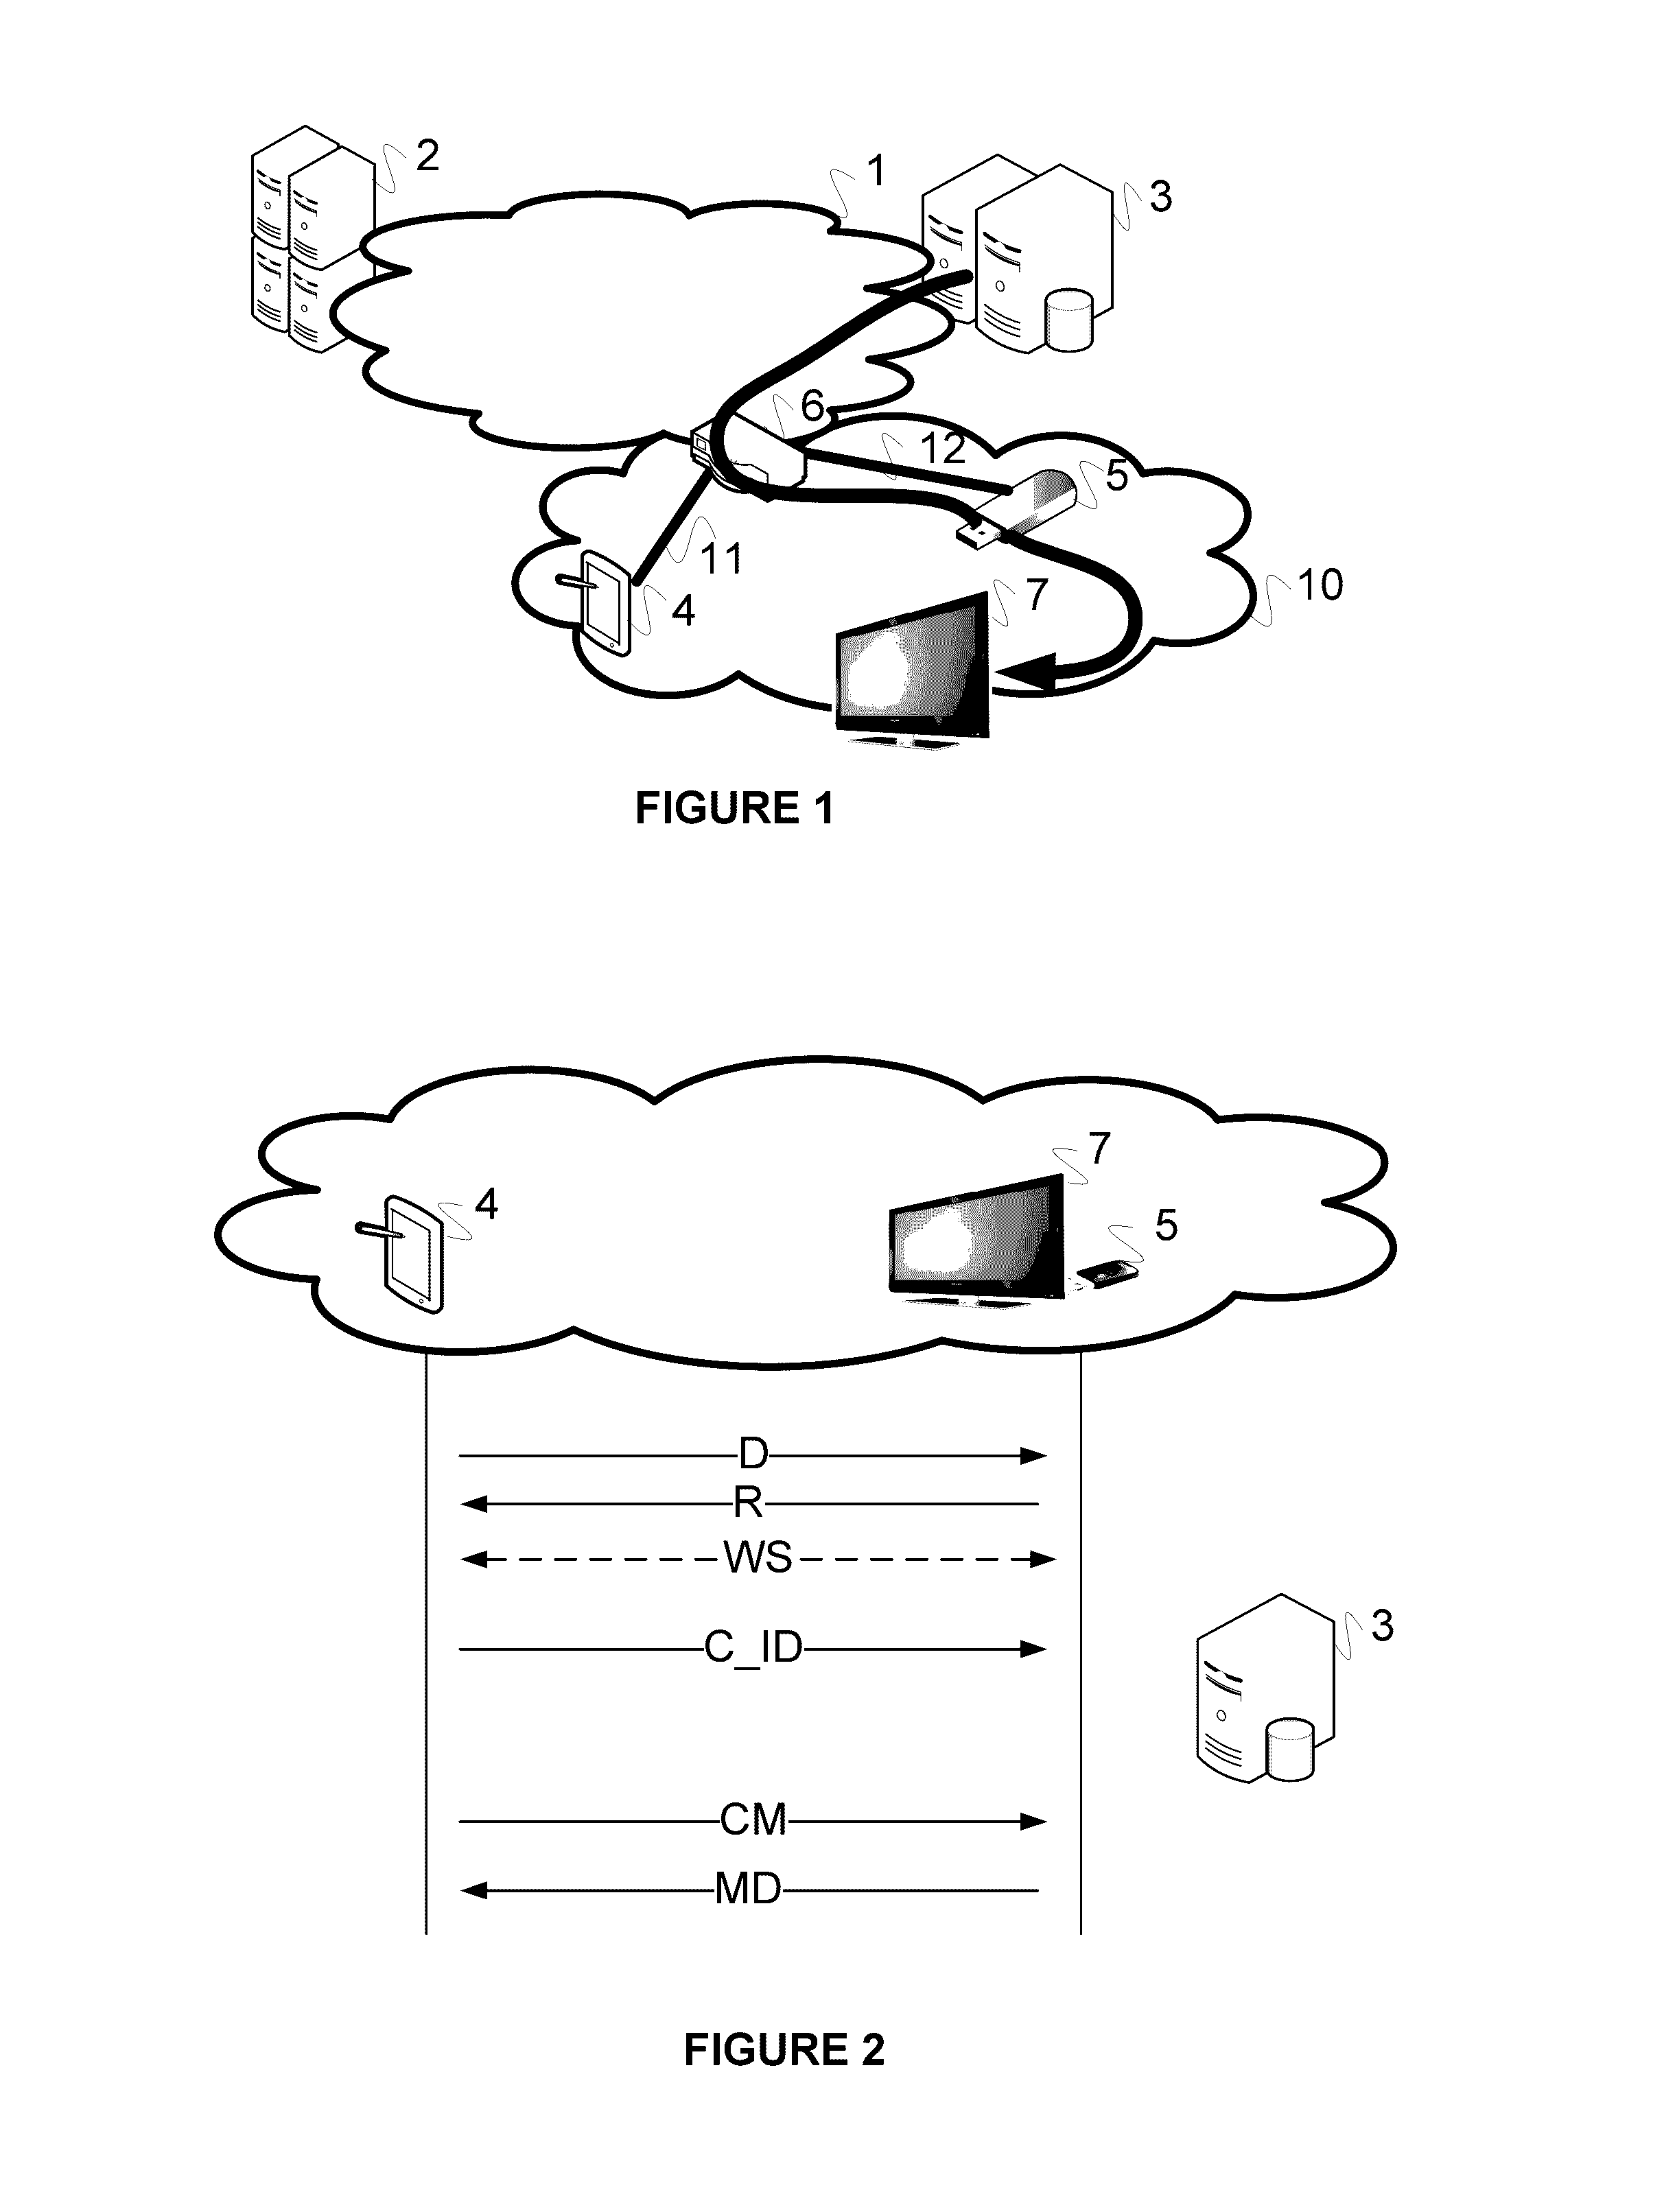 Device and method for transferring the rendering of multimedia content